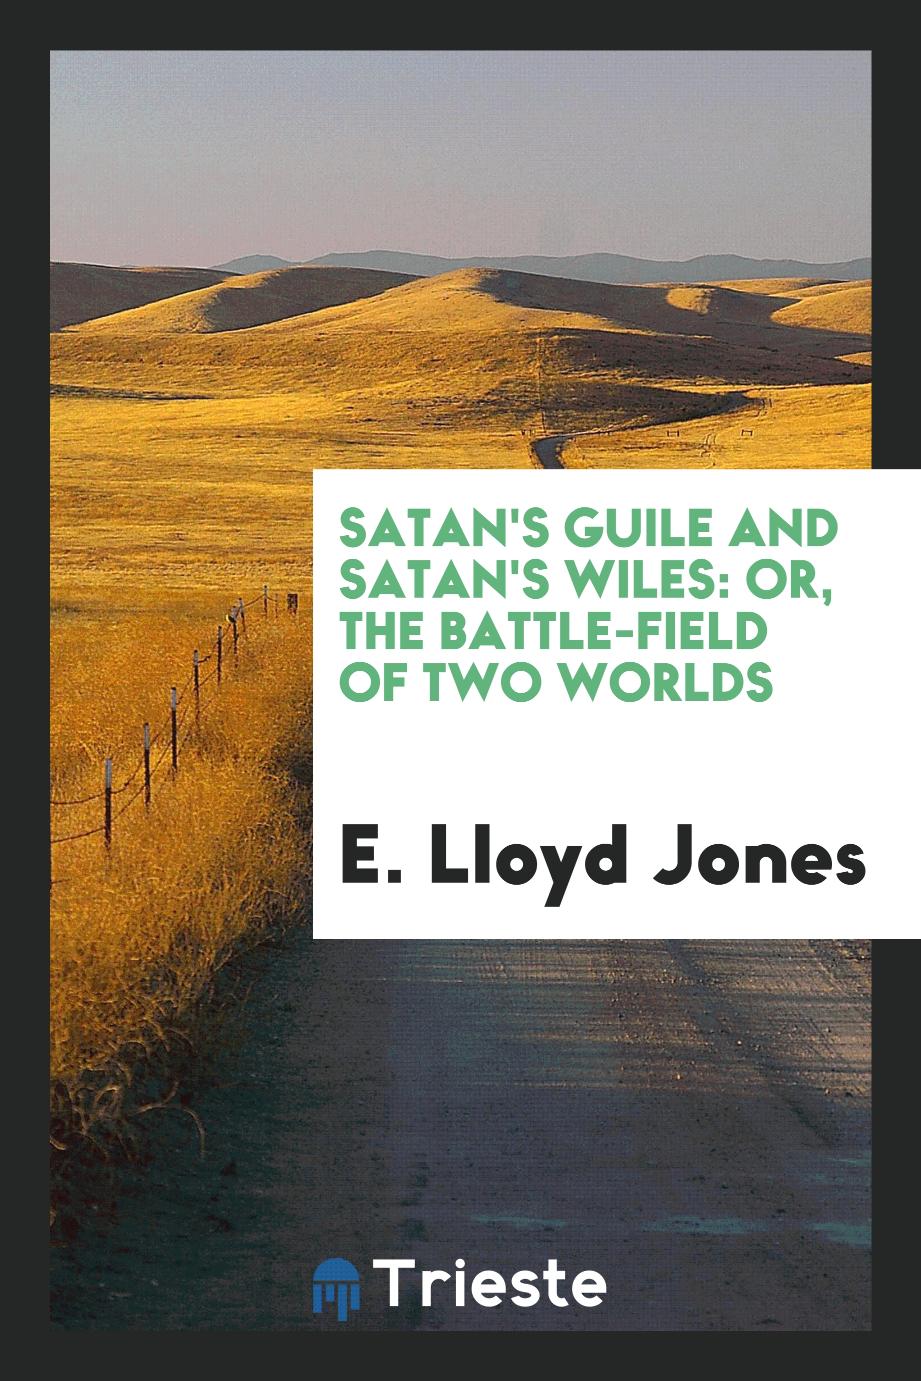 Satan's guile and Satan's wiles: or, The battle-field of two worlds